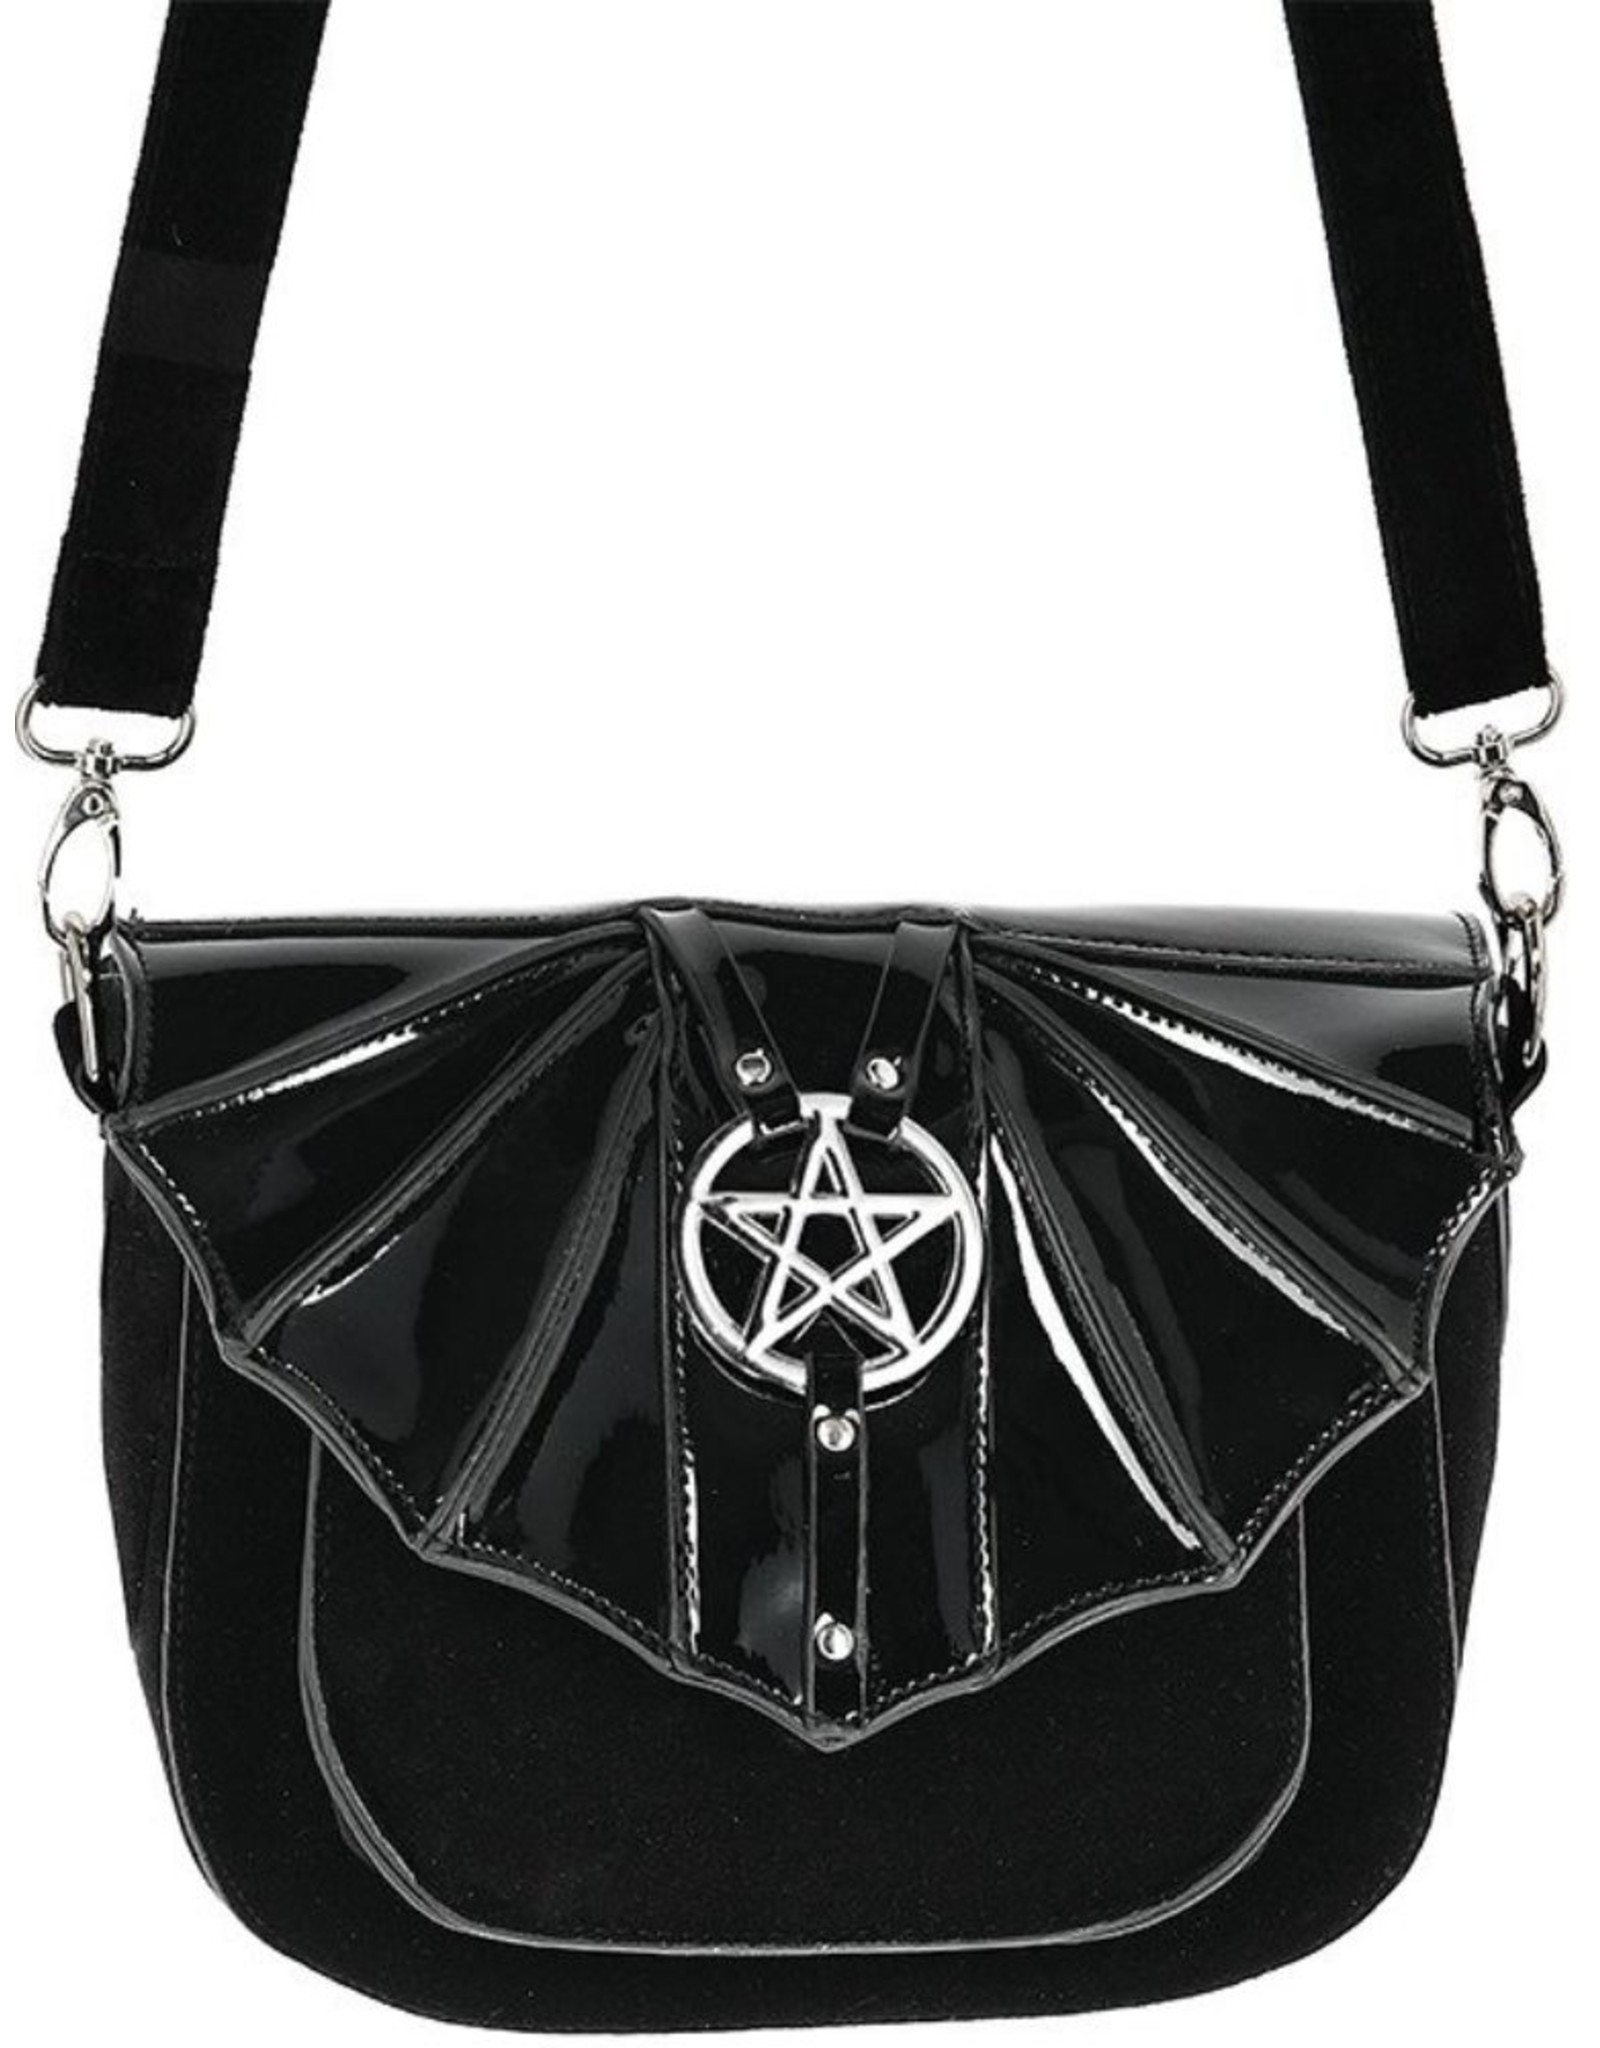 Restyle Gothic bags Steampunk bags - Night Creature Small Gothic Bat handbag with Pentagram